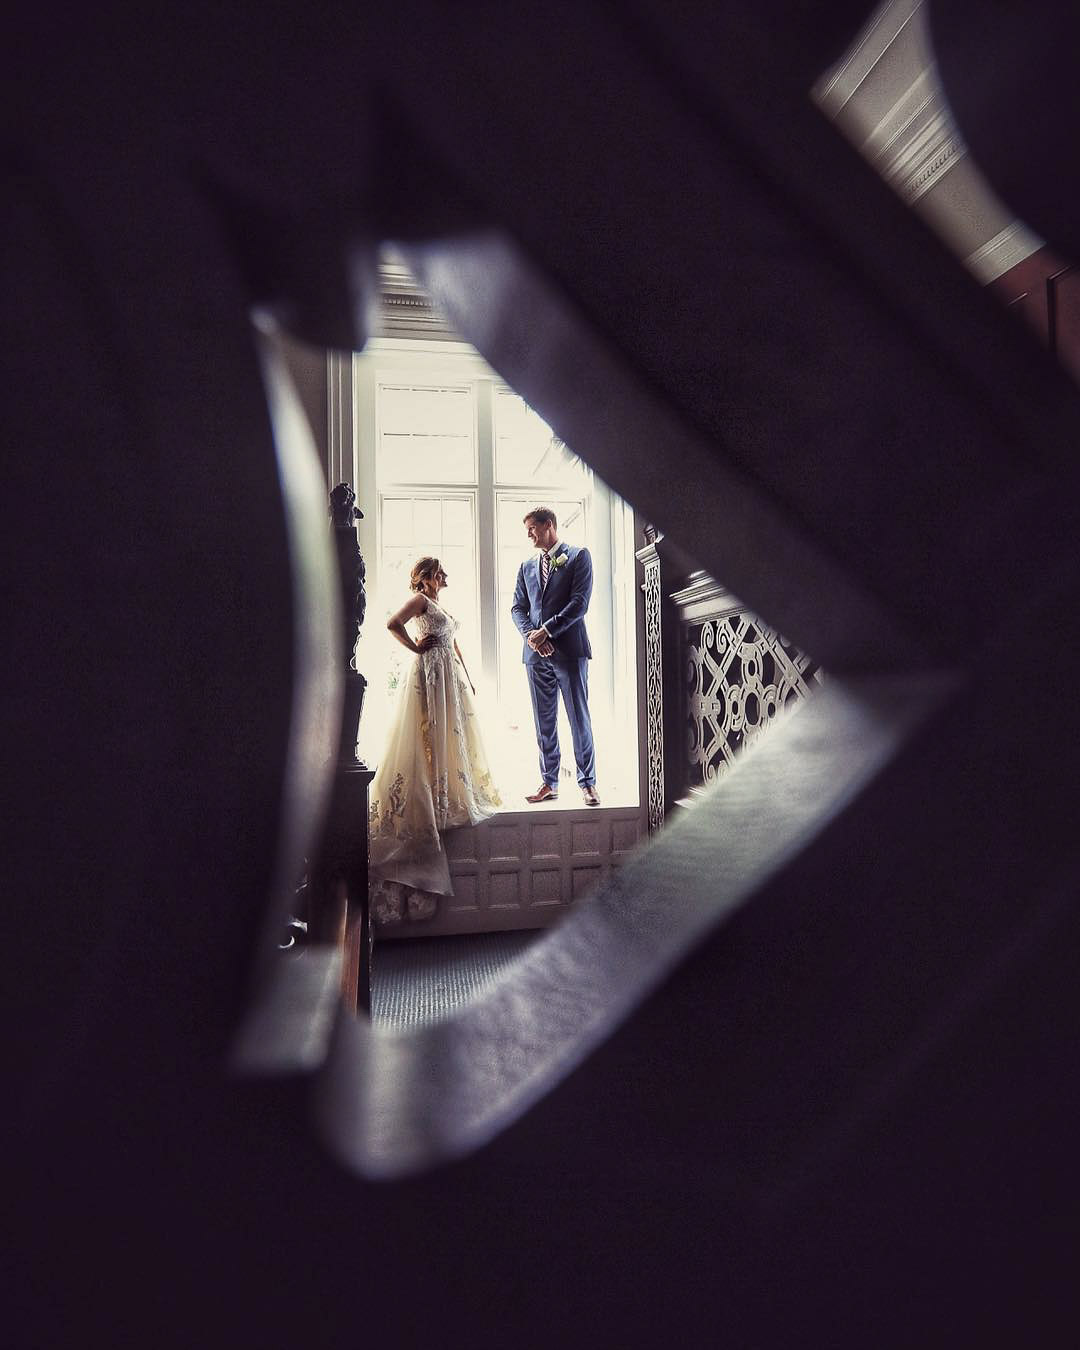 a unique perspective photograph of a couple standing in front of the windows